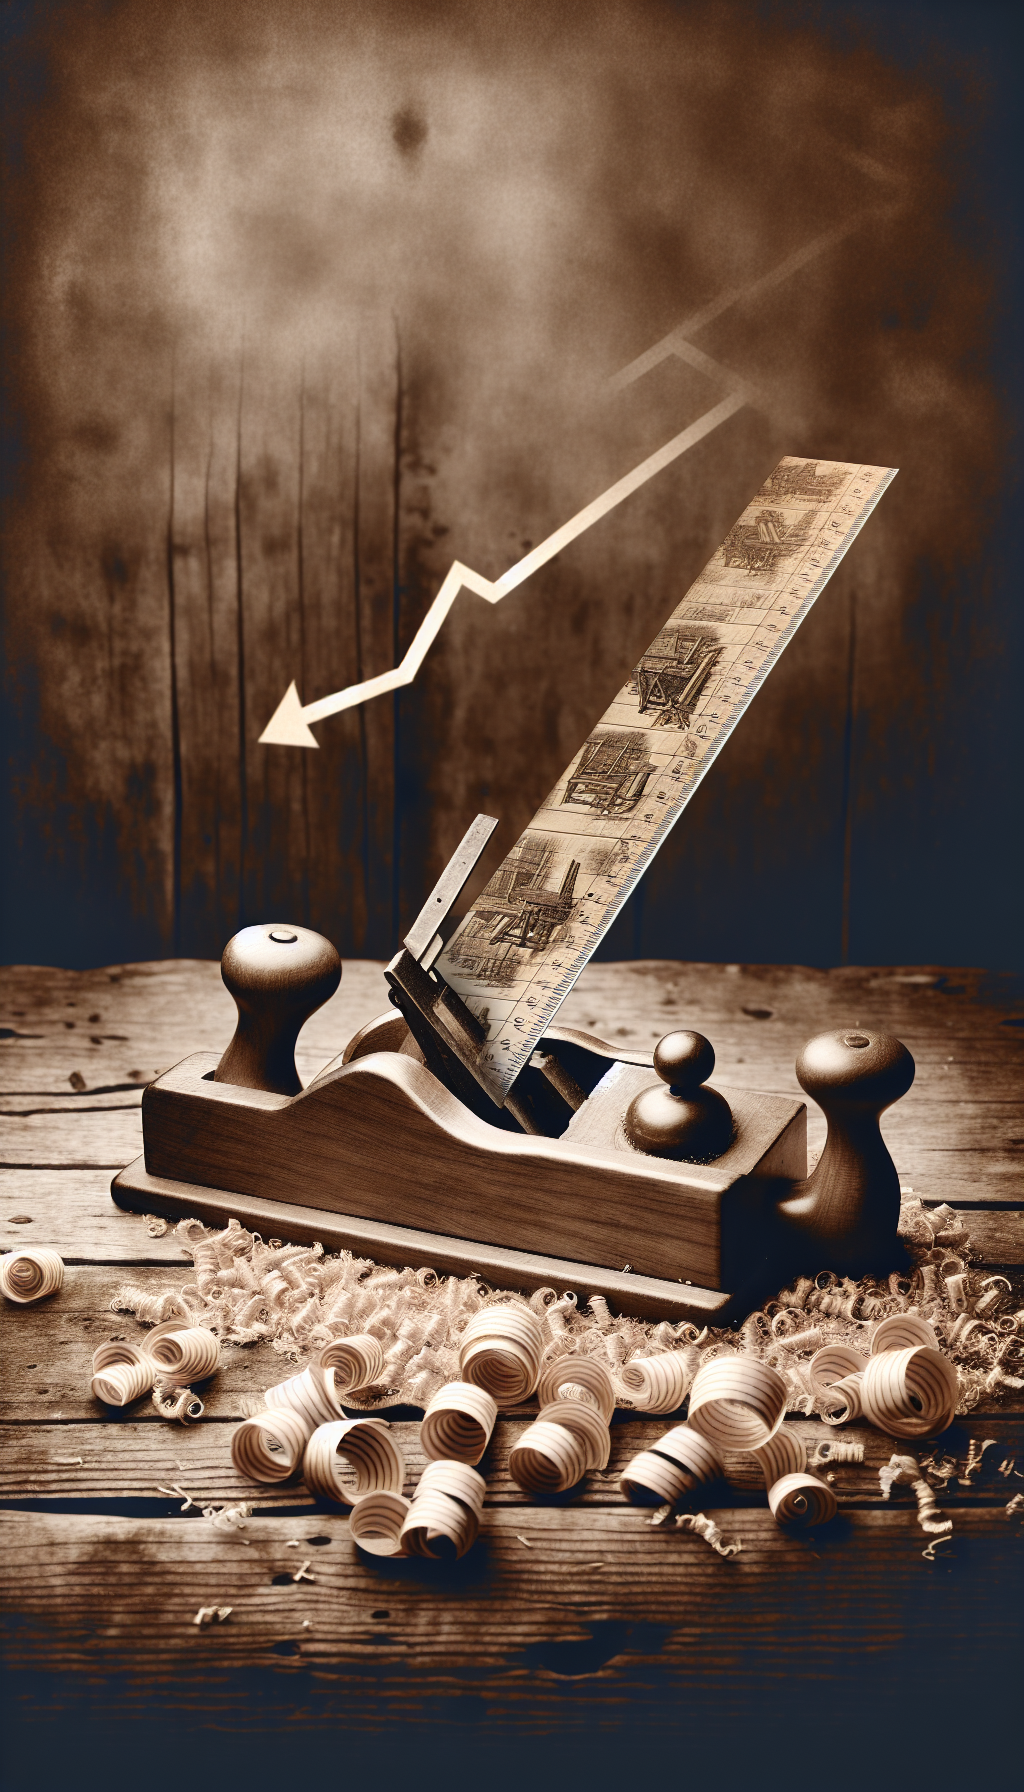 A sepia-toned illustration depicts an antique wood planer resting on an old, scuffed carpenter's bench, with a semi-transparent overlay of historical scenes etched into its blade, suggesting reflections. Next to it, a rising graph made of wood shavings implies the increasing value of such antiques, blending the warmth of woodworking heritage with the analytical edge of collectible appreciation.